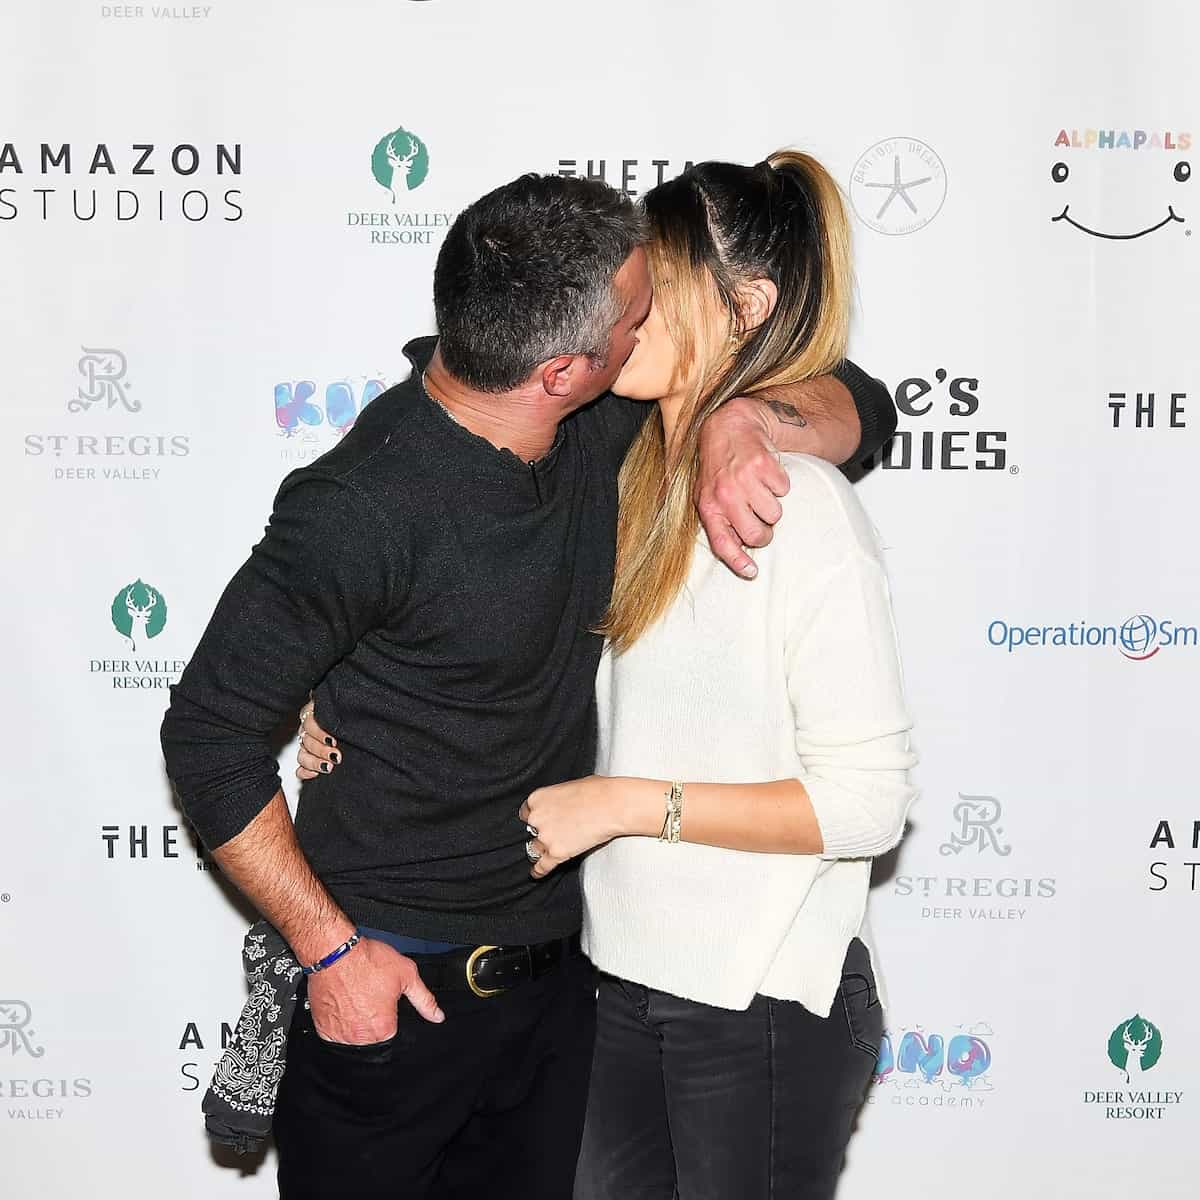 Image of Taylor Kinney kissing his girlfriend, Ashley Cruger